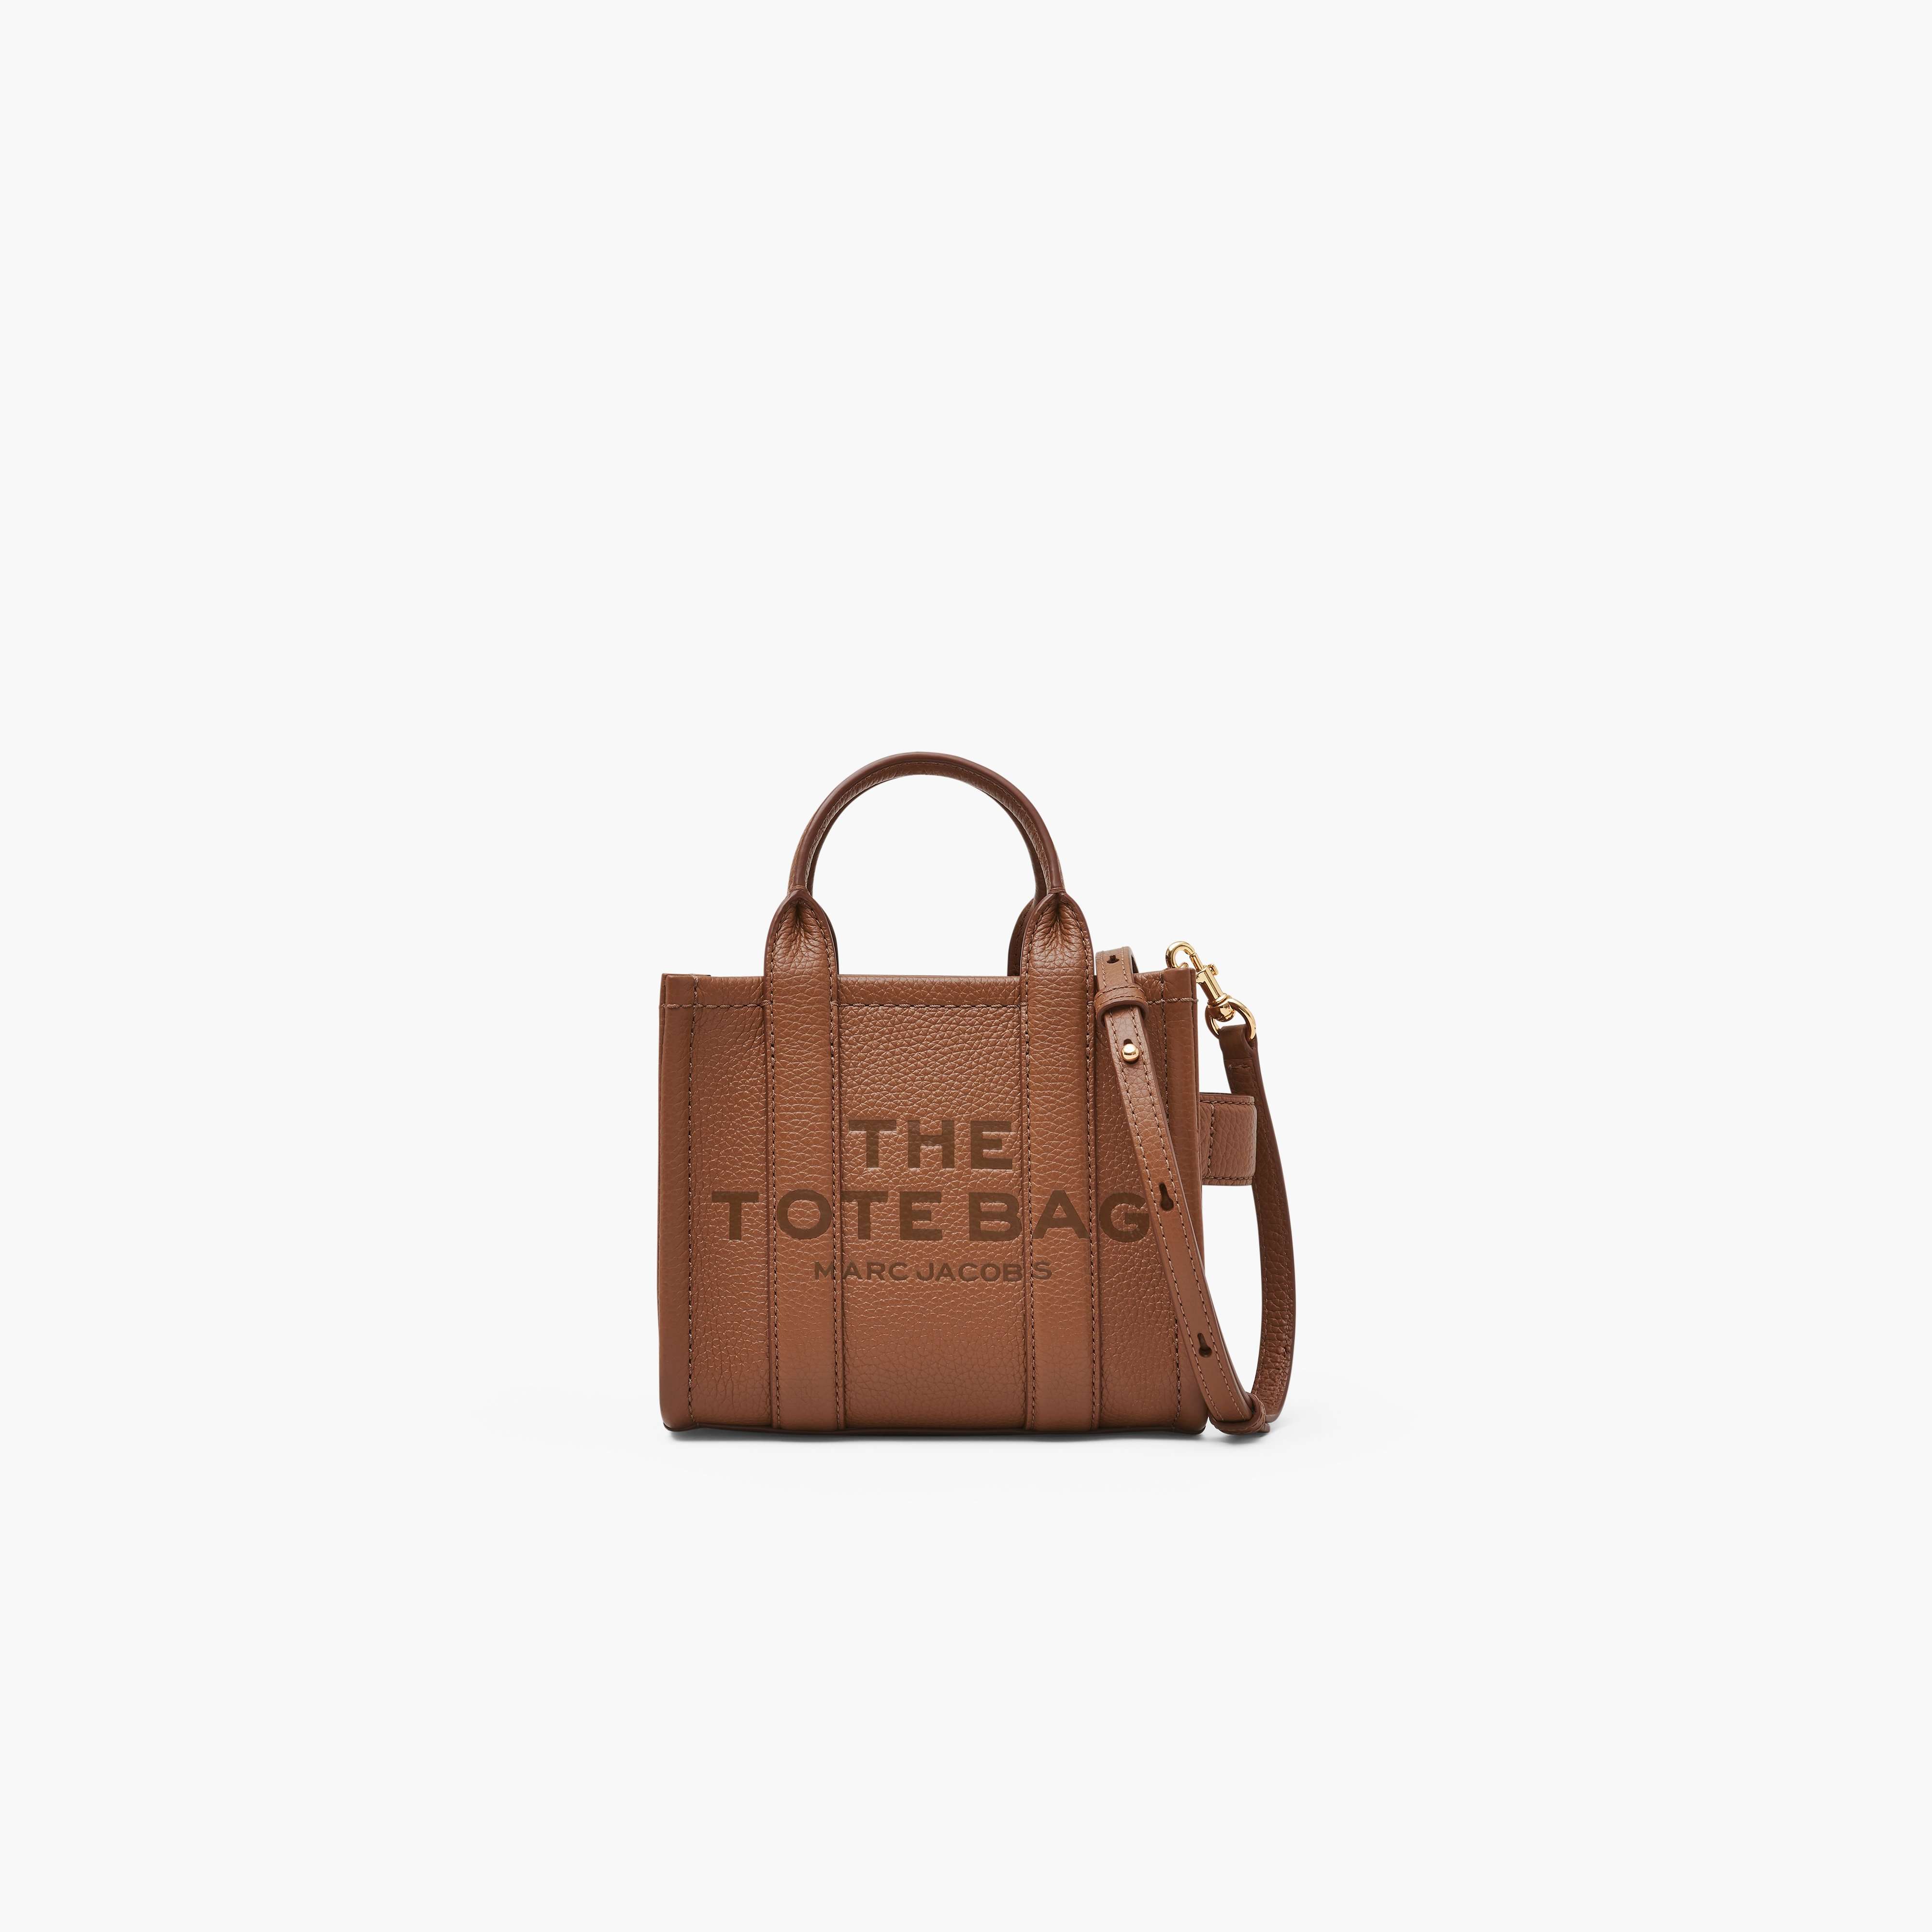 The Leather Crossbody Tote Bag in Argan Oil